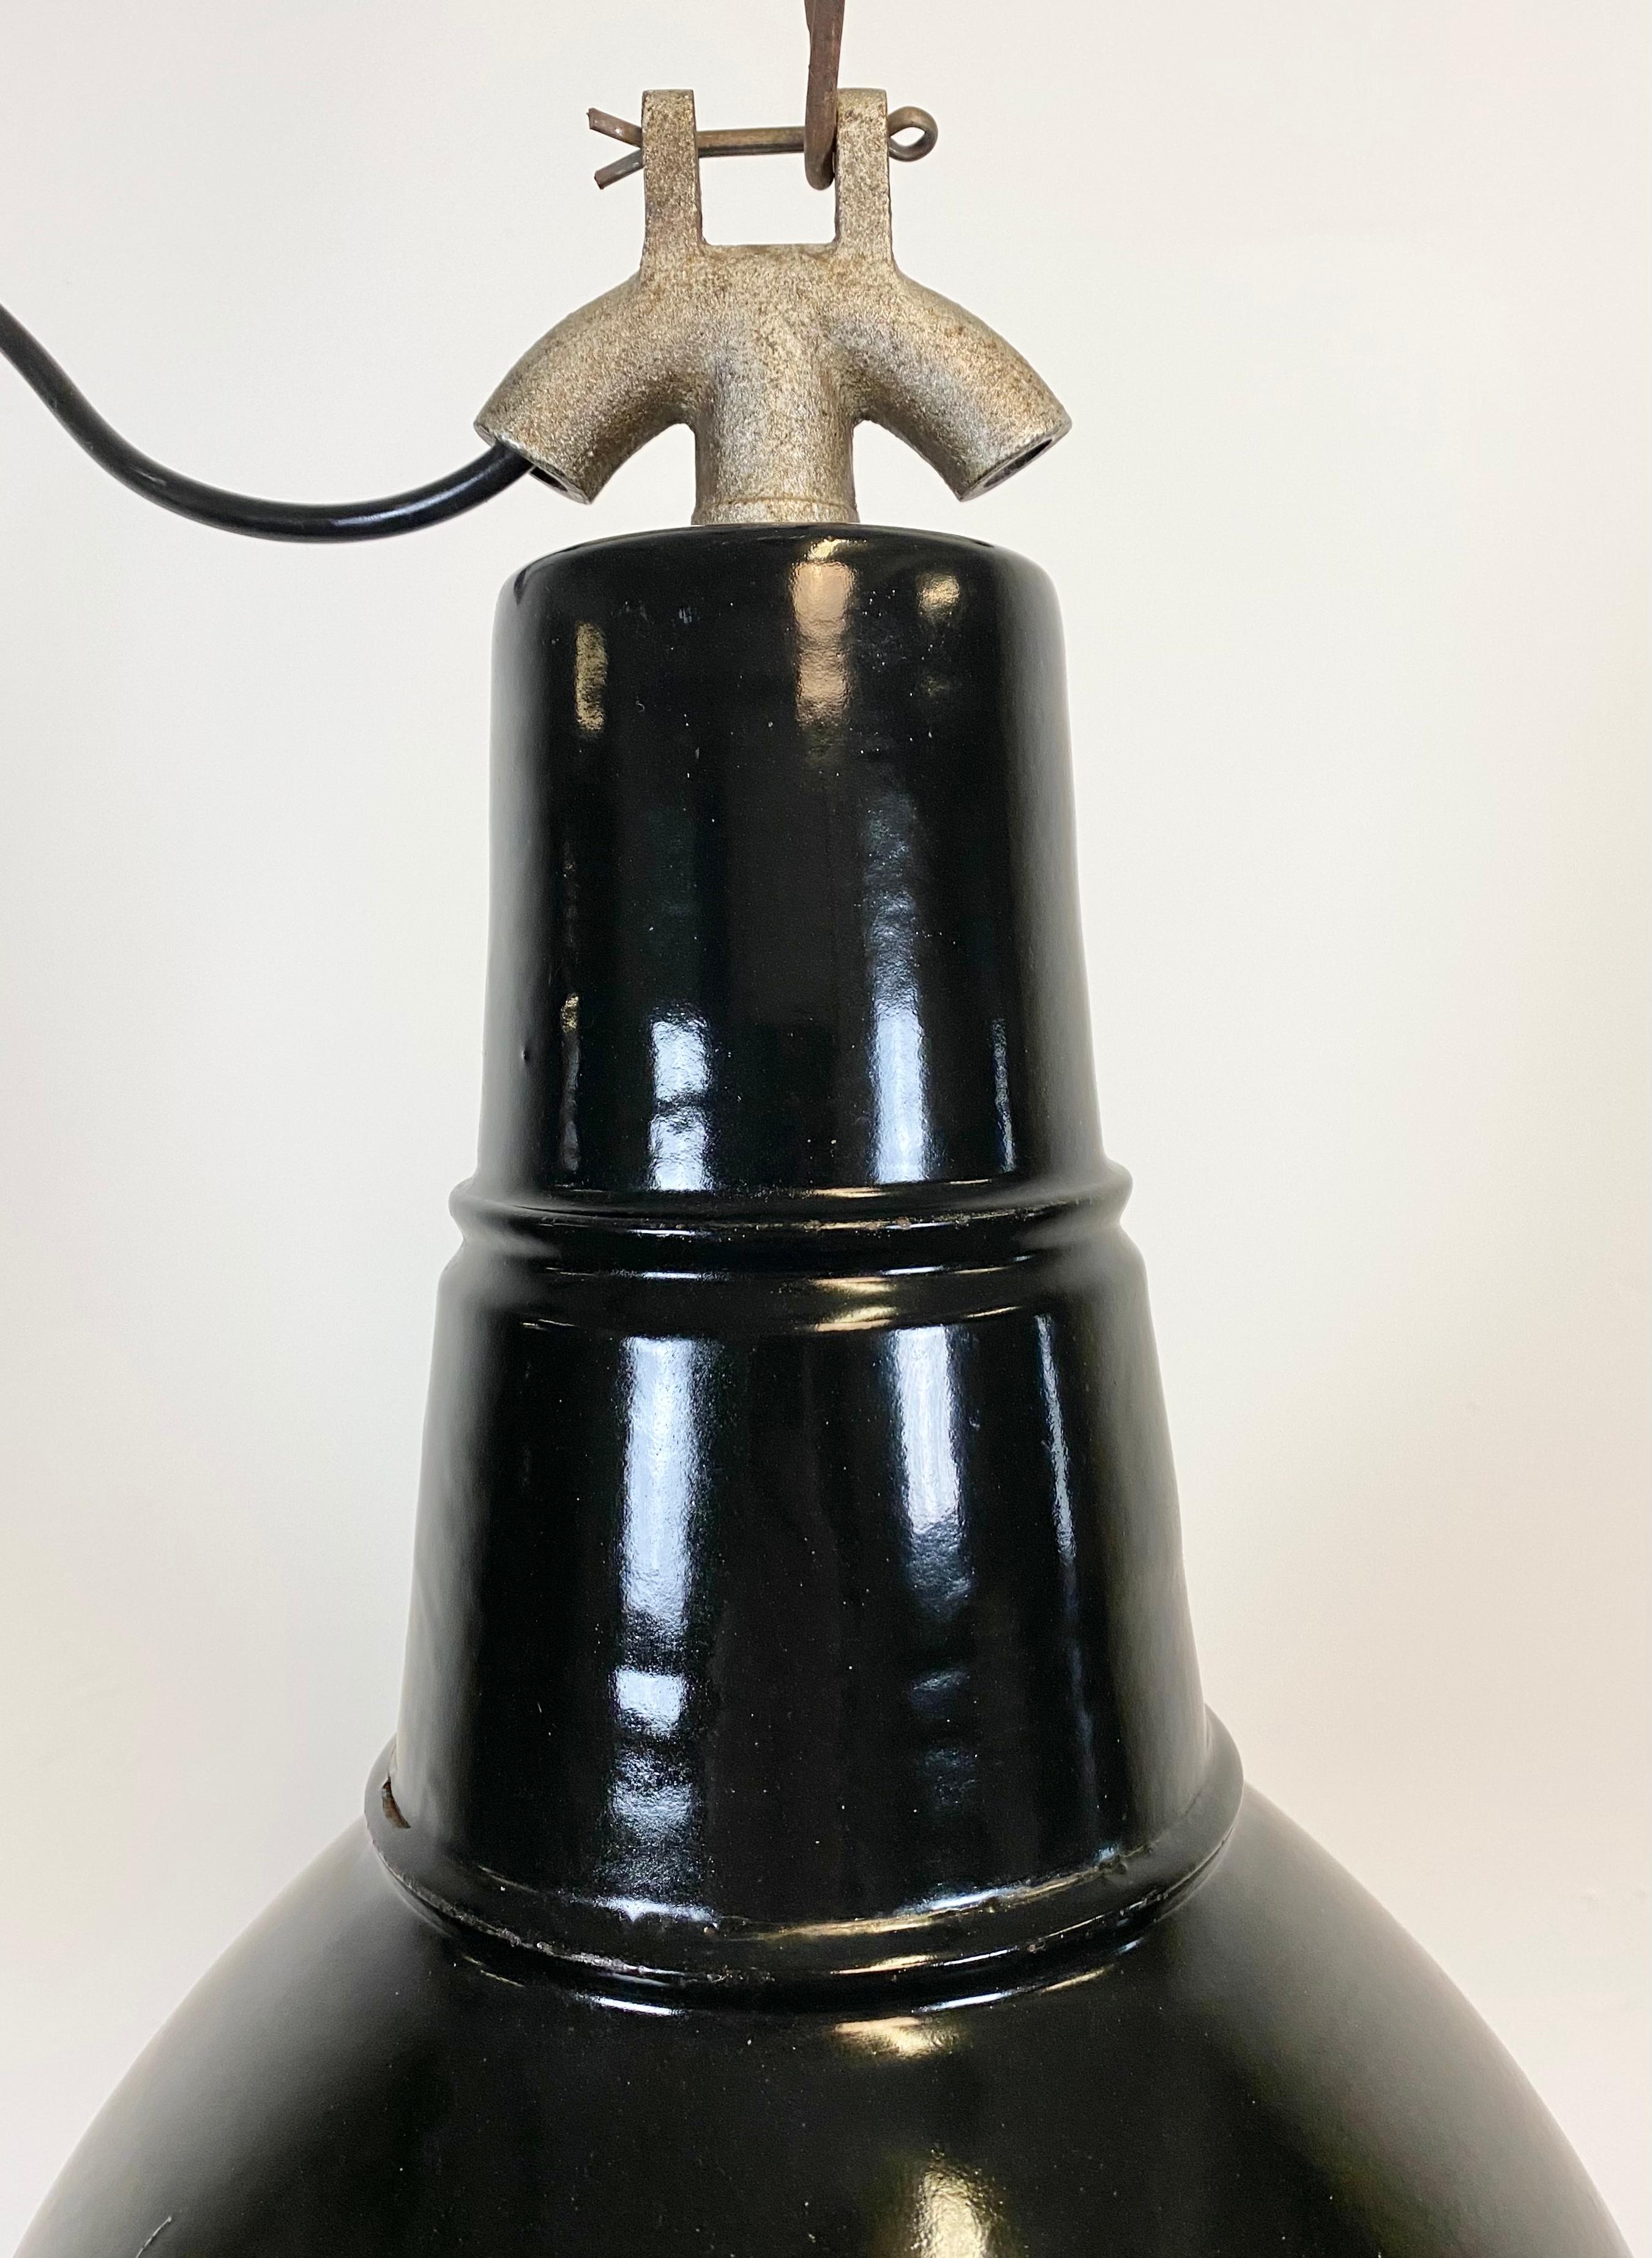 This vintage industrial black enamel pendant lamp in Bauhaus style was used in factories in the former Czechoslovakia during the 1930s. It has a white enamel interior and an interesting cast iron top. It features a new porcelain socket for E 27